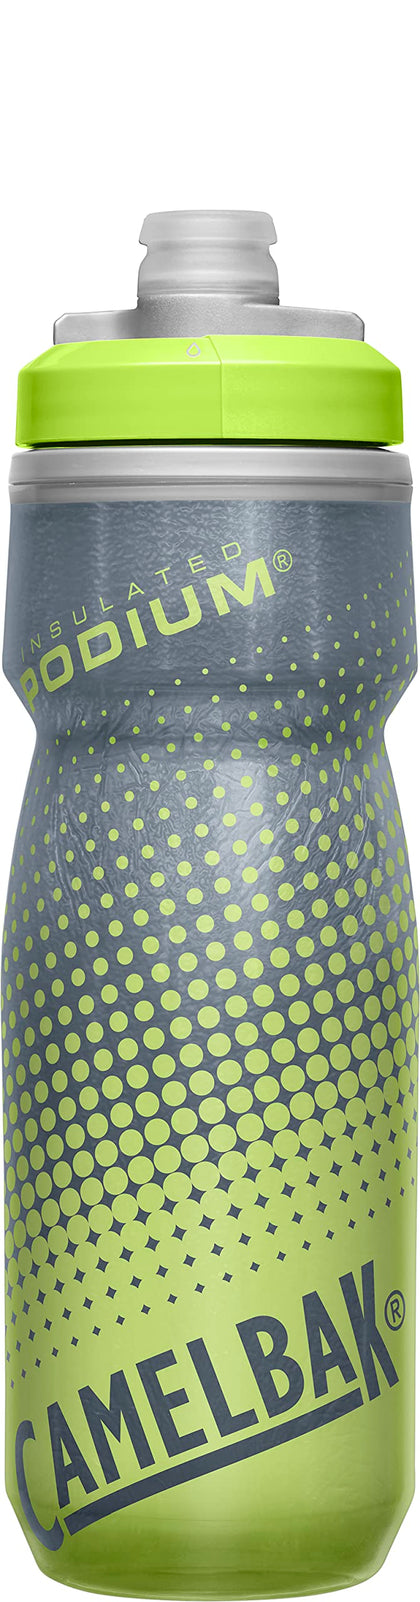 CamelBak Podium Chill Insulated Bike Water Bottle - Easy Squeeze Bottle - Fits Most Bike Cages - 21oz, Yellow Dot